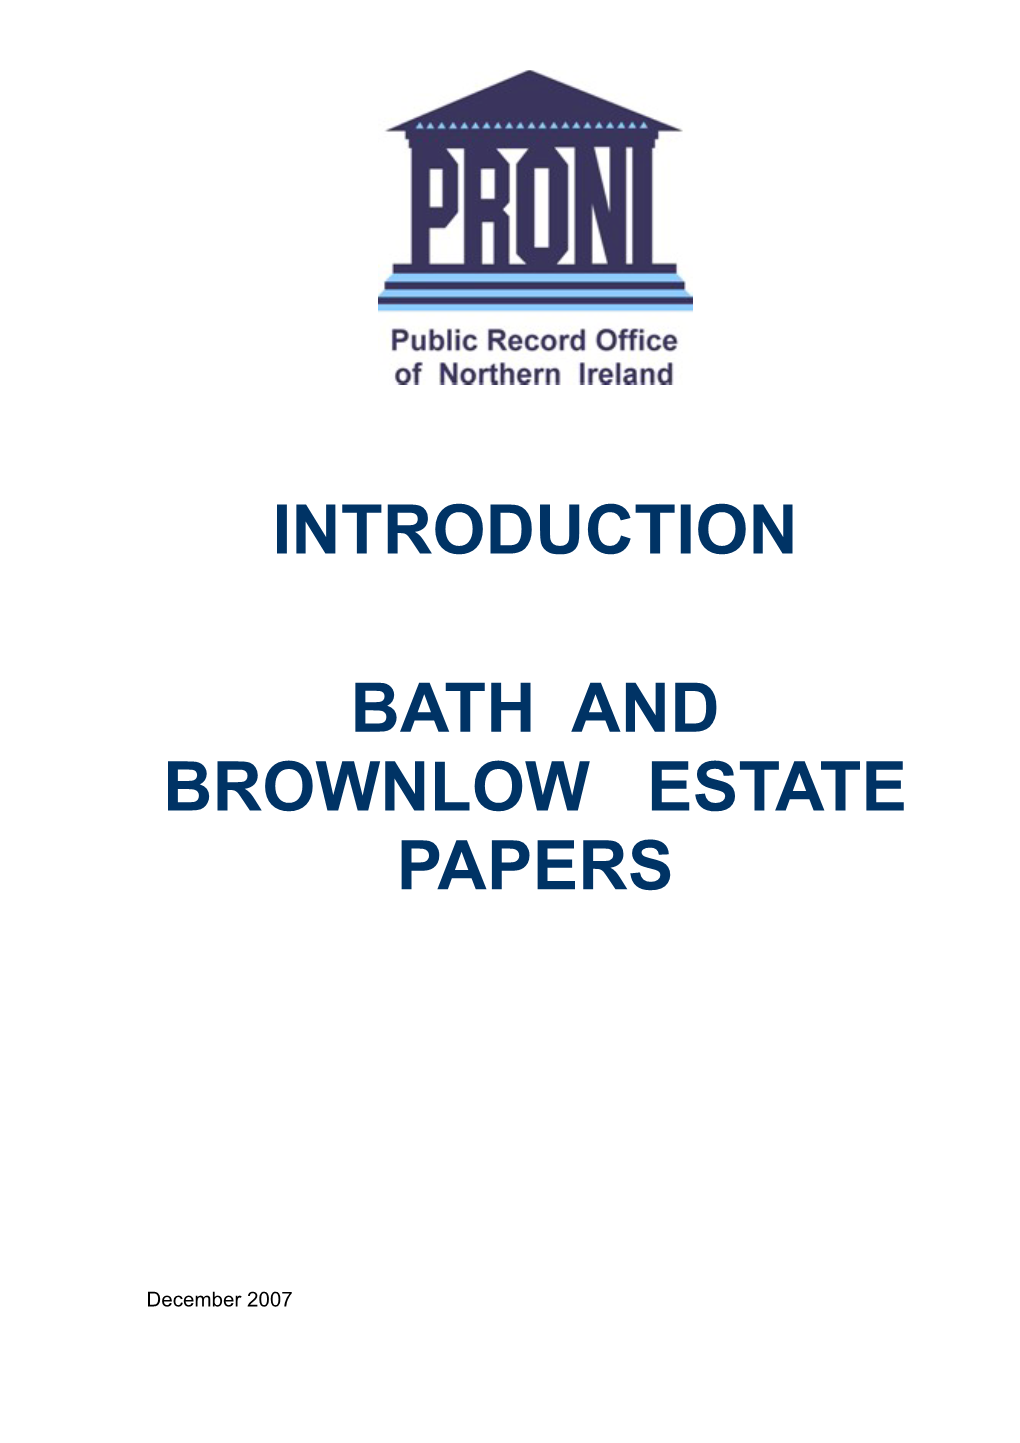 Introduction to the Bath and Brownlow Estate Papers Adobe